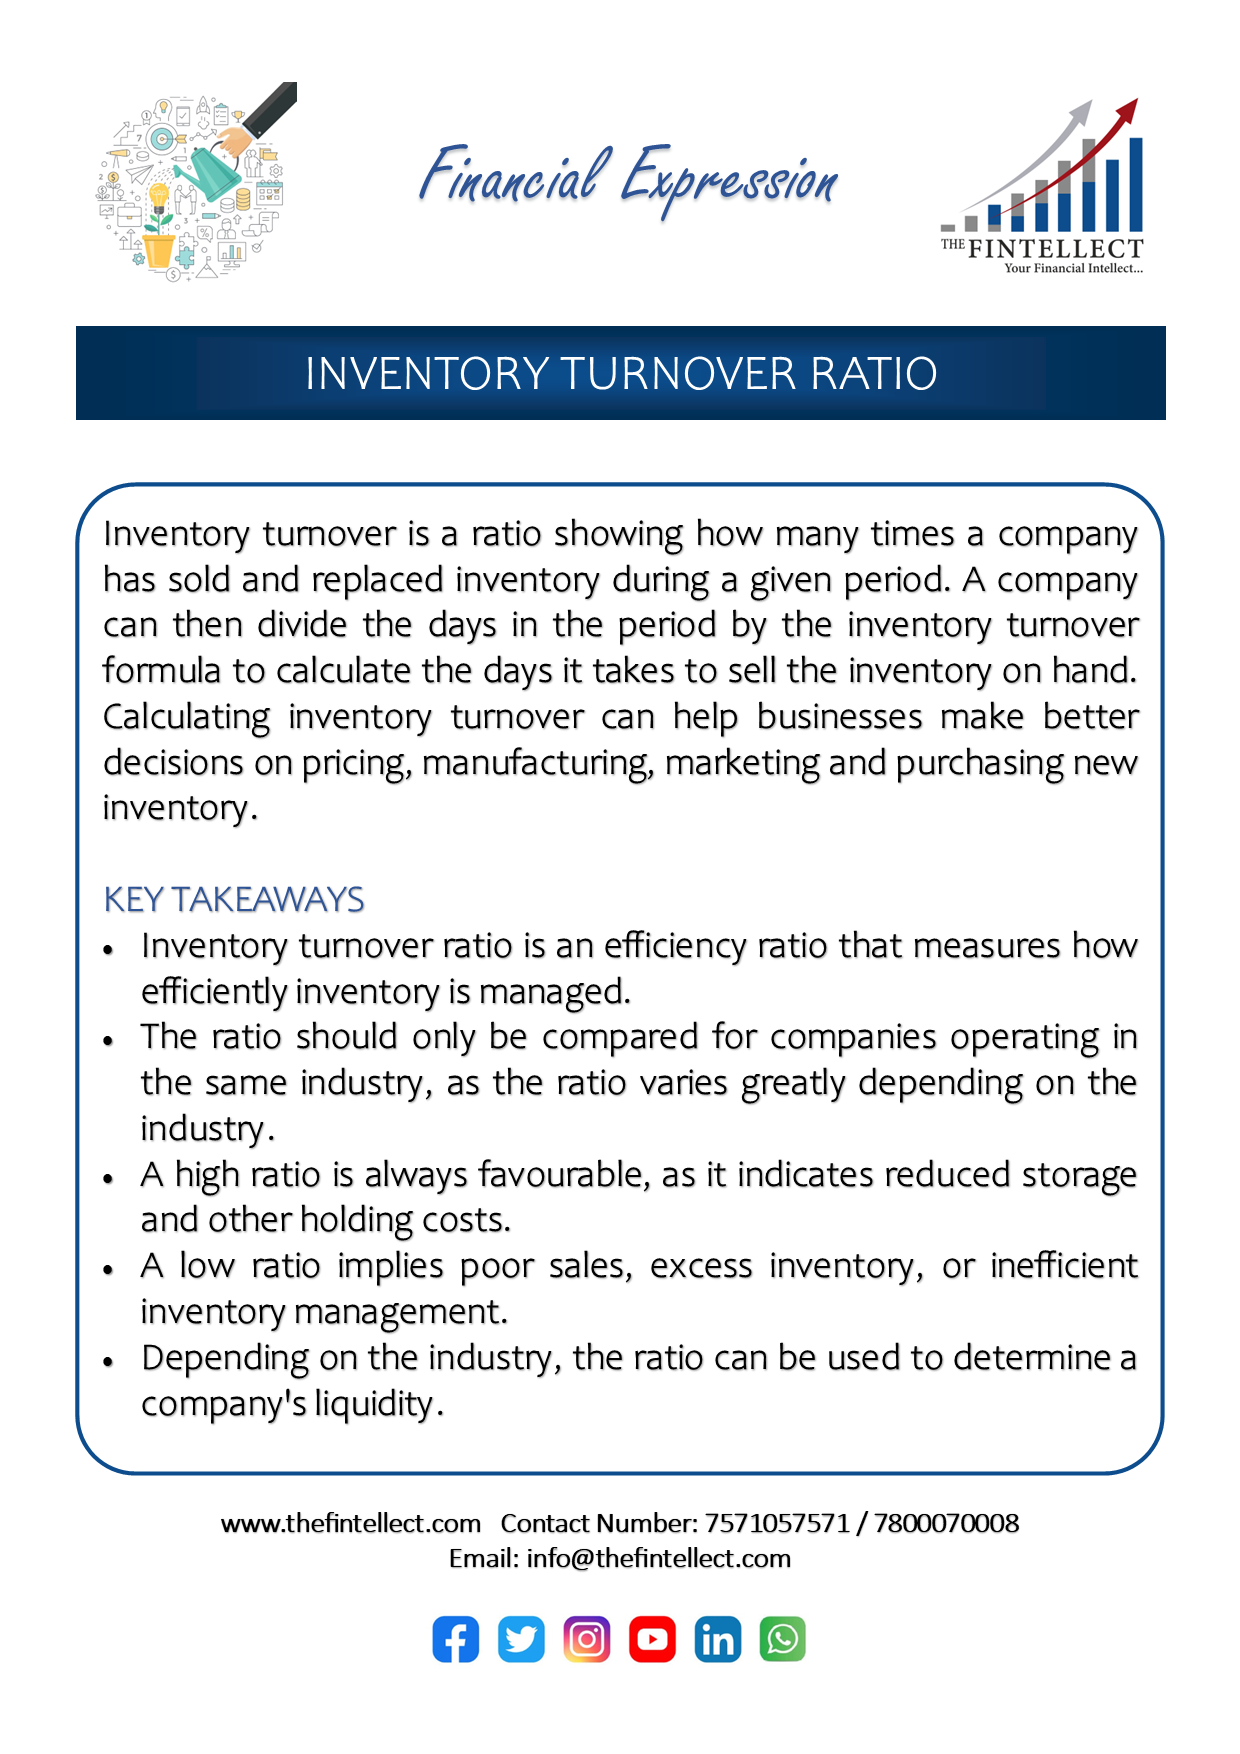 9621033_INVENTORY TURNOVER RATIO.png